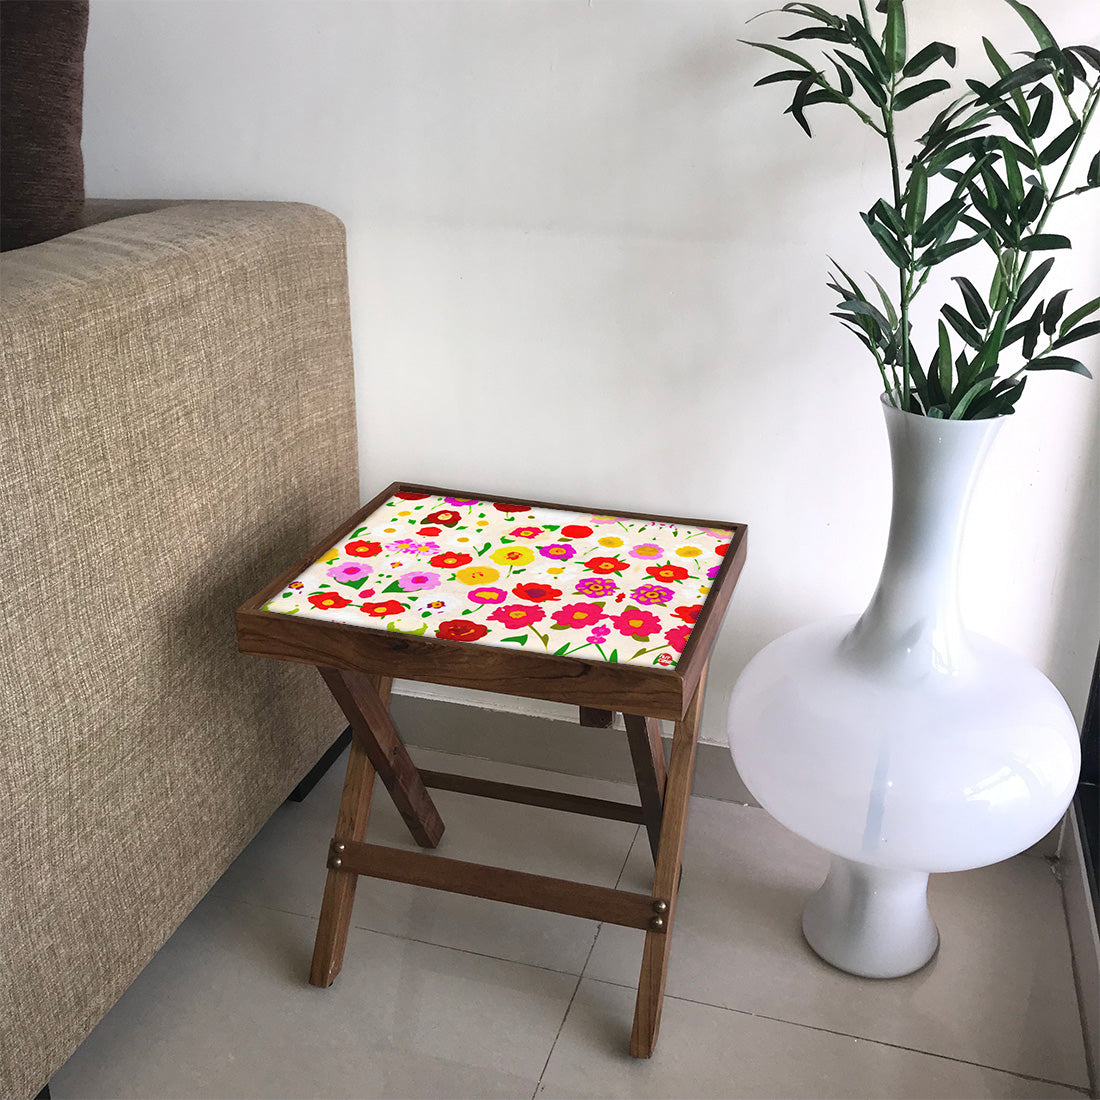 Wooden Side Table for Bedroom Decor - Colorful Flower